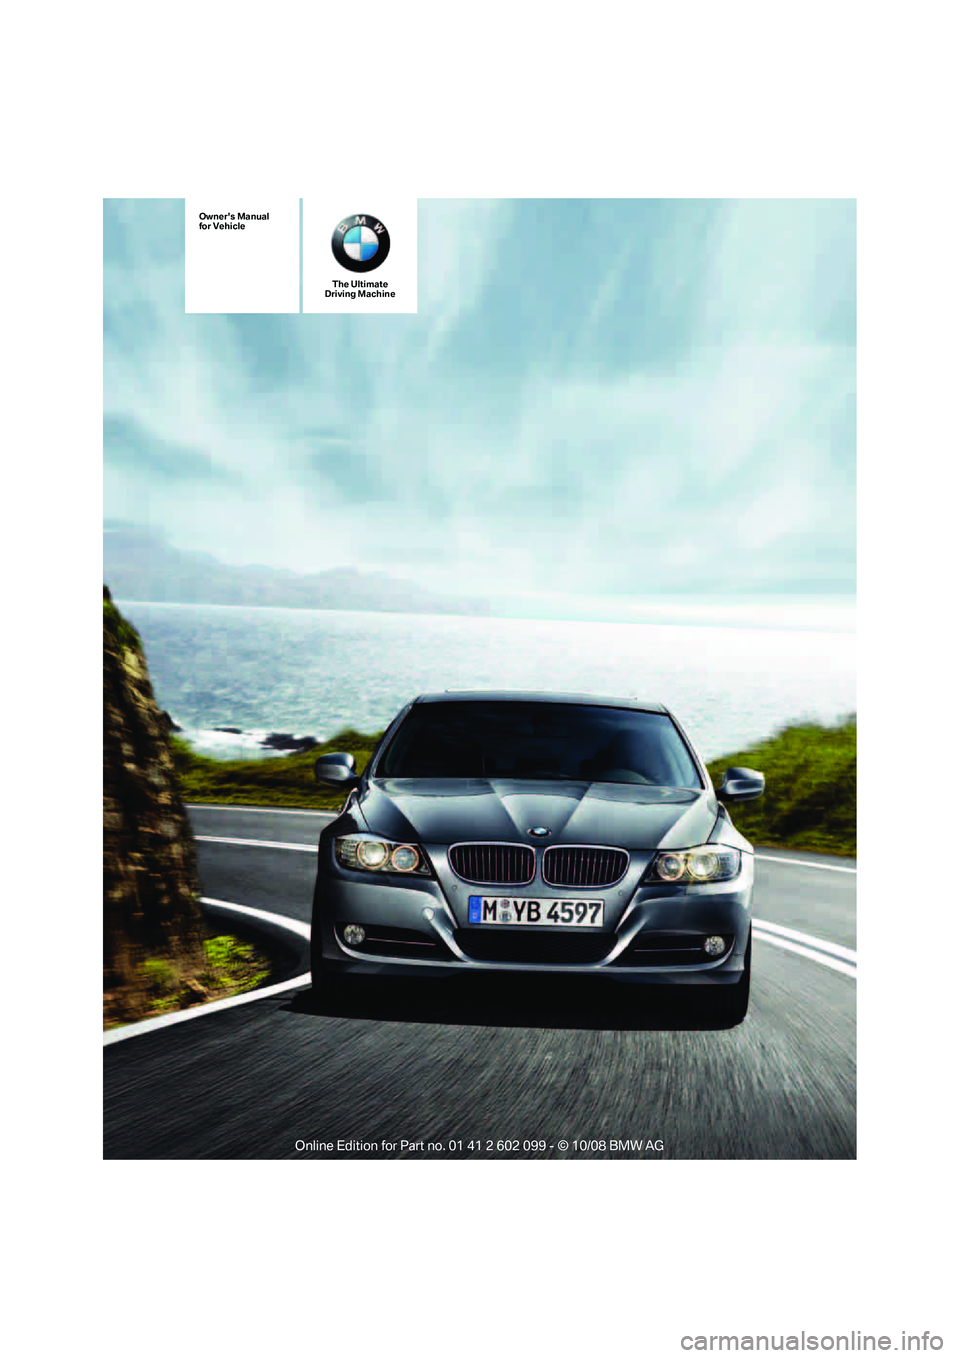 BMW 328I XDRIVE SPORTS WAGON 2009  Owners Manual The Ultimate
Driving Machine
Owners Manual
for Vehicle
ba8_E9091_cic.book  Seite 1  Mittwoch, 29. Oktober 2008  2:59 14 